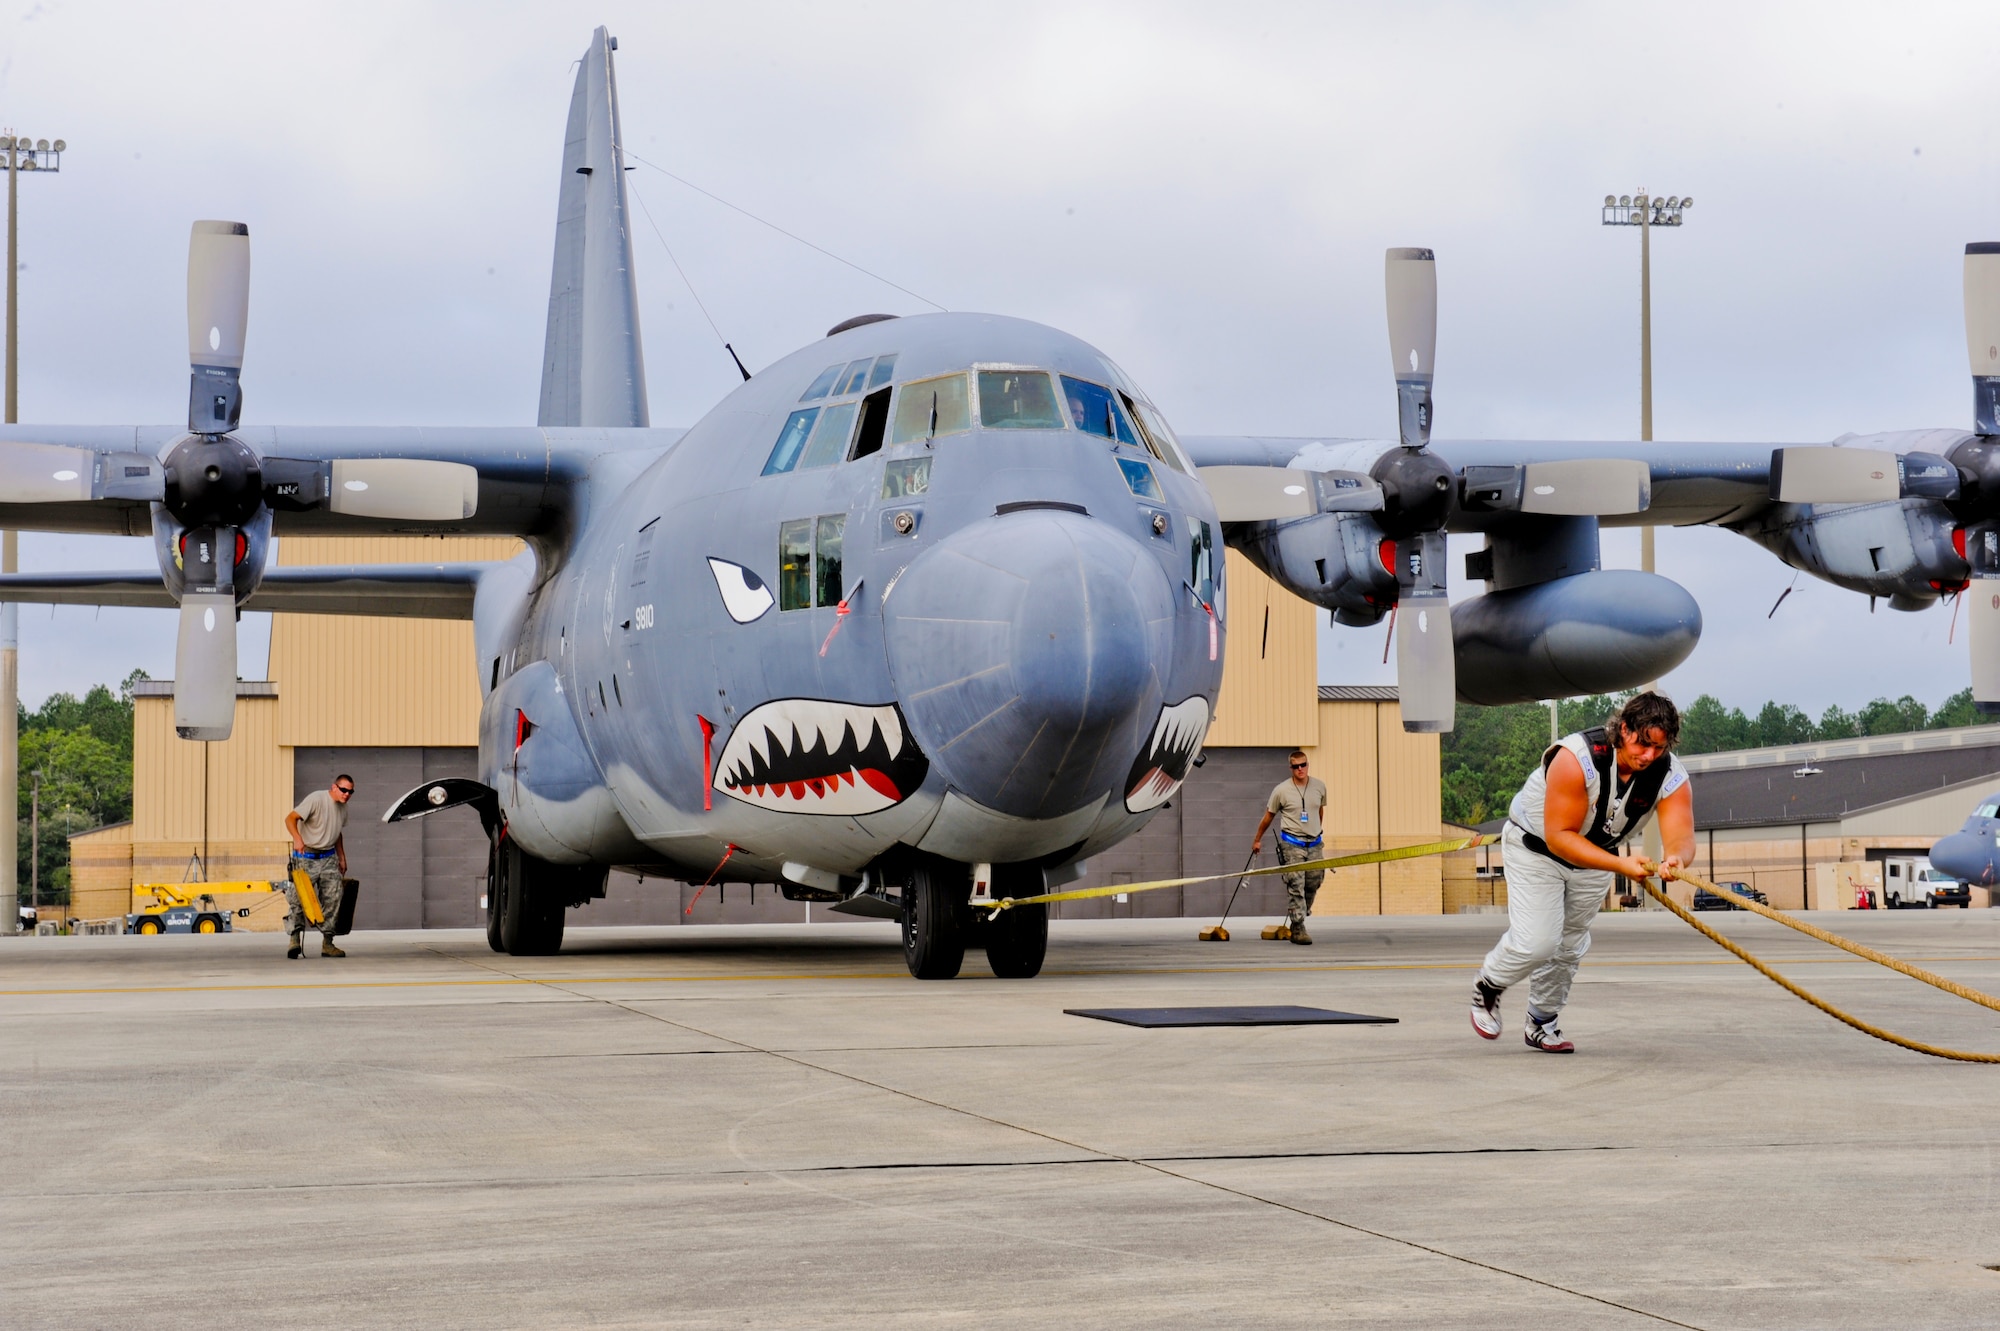 Mark Kirsch, strong man for "Man vs. Jumbo Jets", pulls an HC-130 Combat King at Moody Air Force Base, Ga., Oct. 5, 2012. Kirsch will be performing in the upcoming open house, Oct. 27-28, where he will be pulling a HC-130 Combat King. (U.S. Air Force photo by Staff Sgt. Joshua J. Garcia/Released)